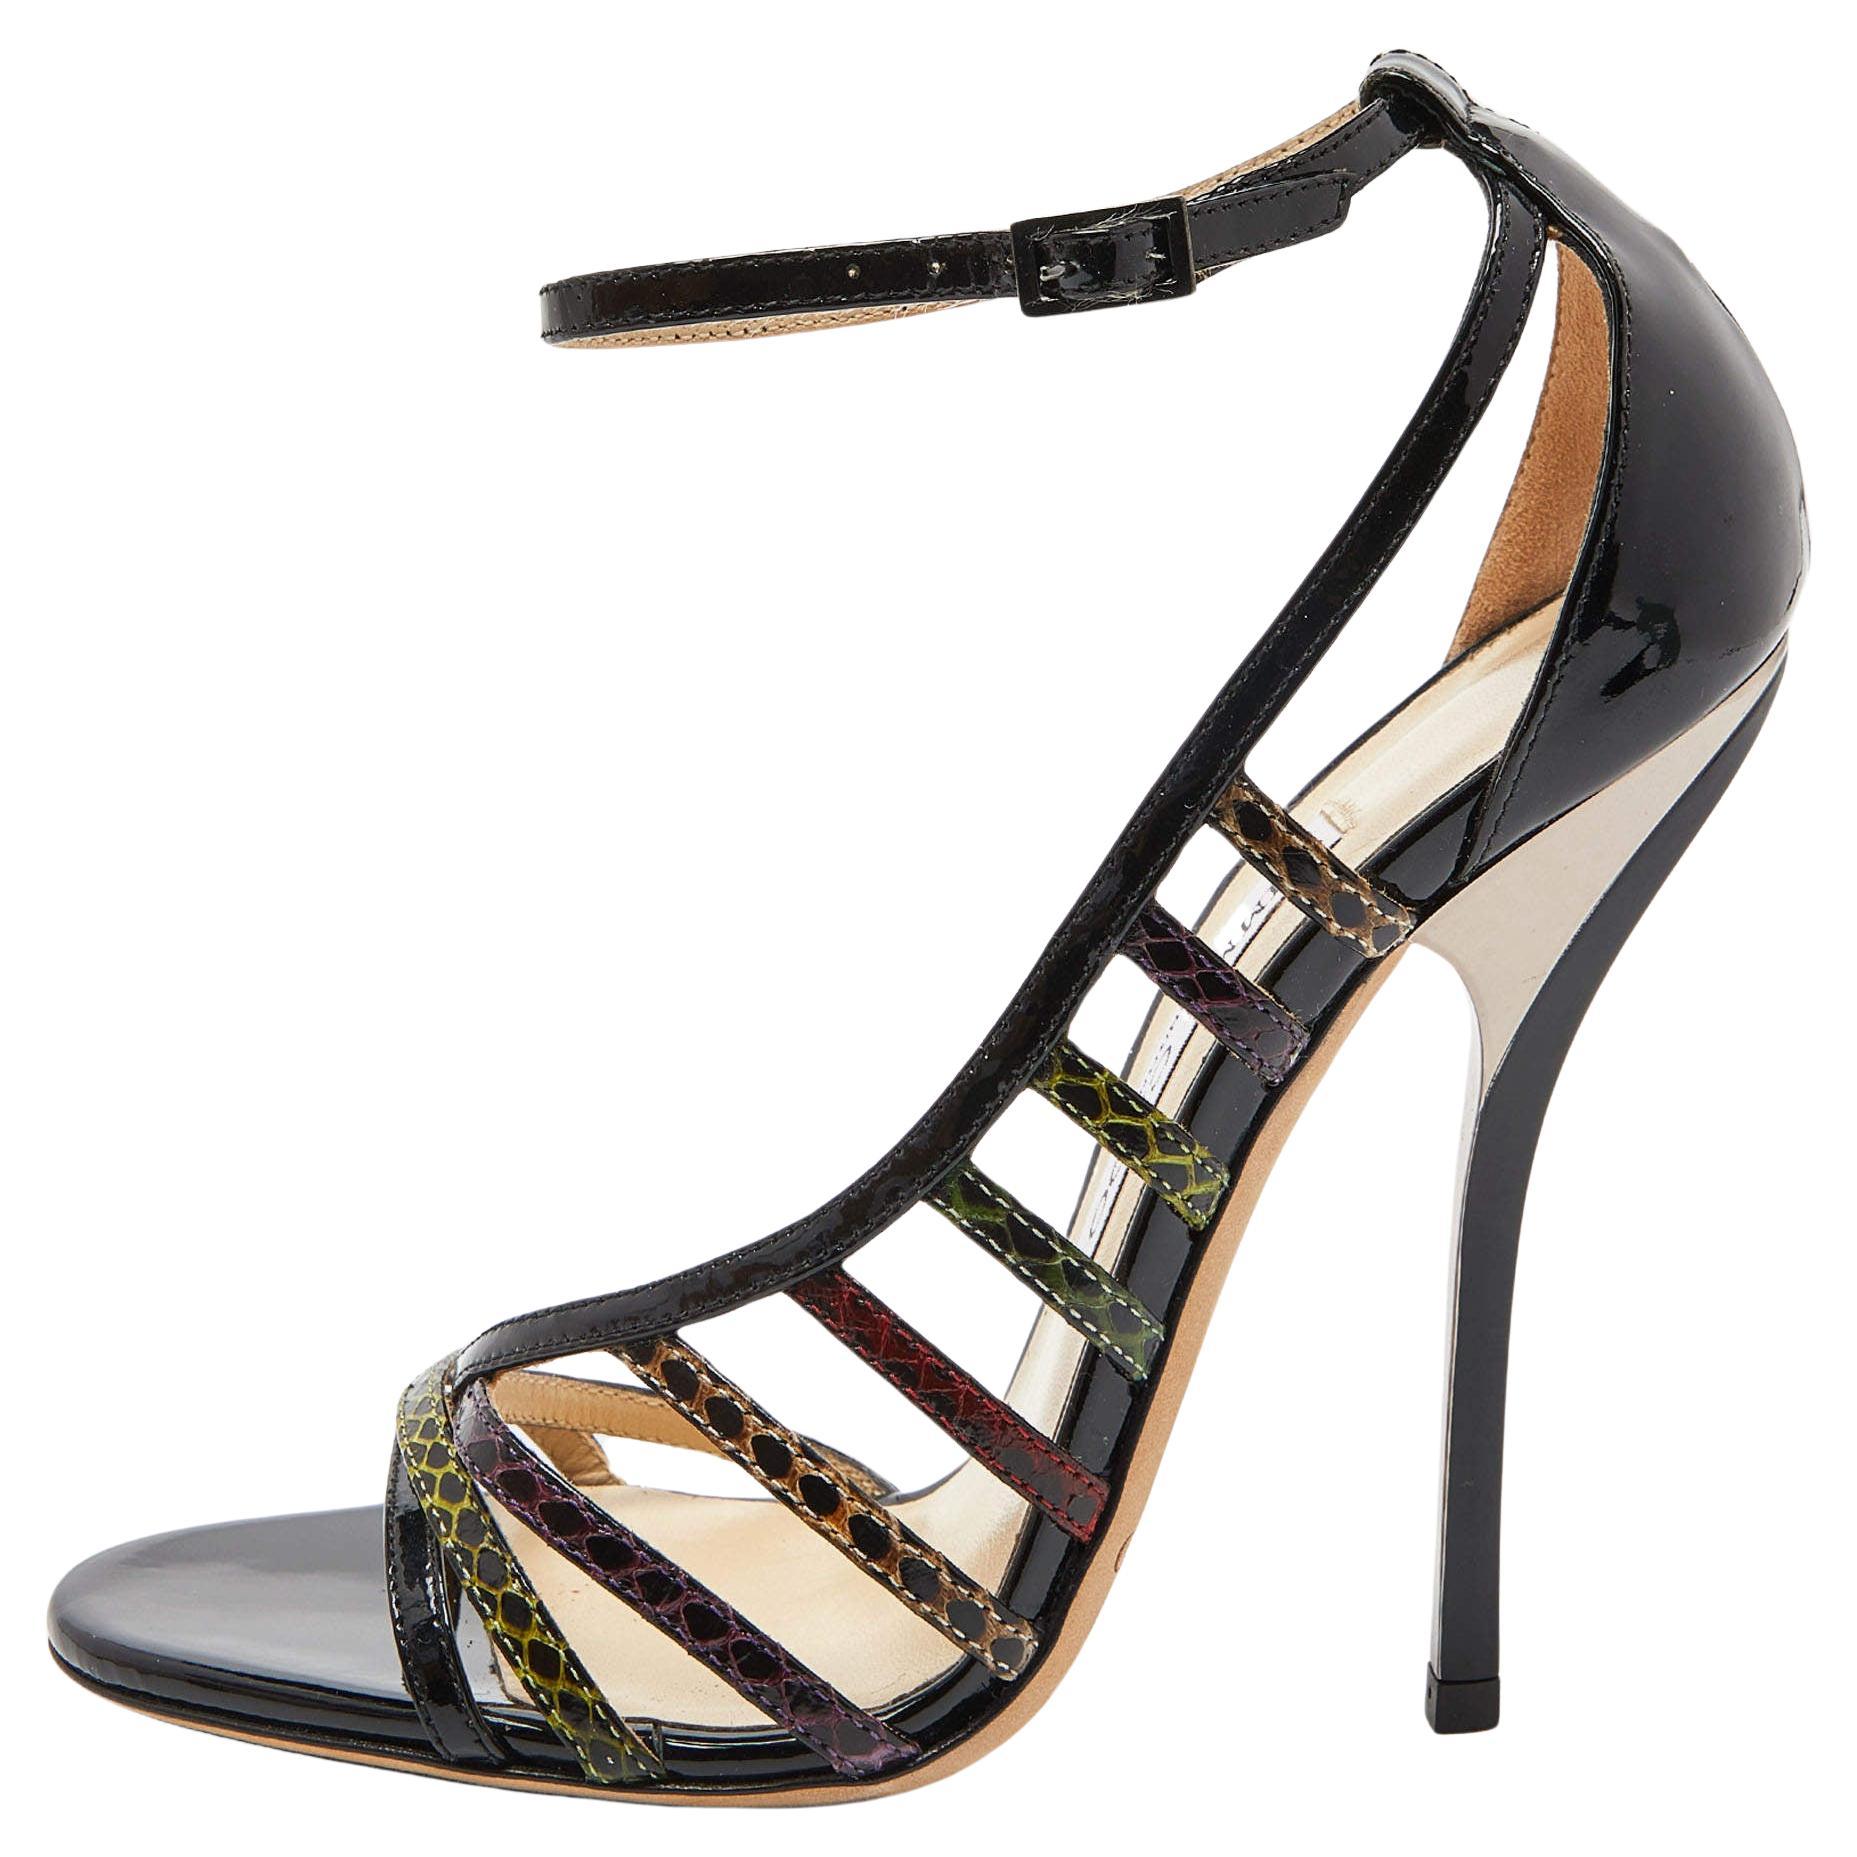 Jimmy Choo Multicolor Snakeskin and Patent Leather Strappy Sandals Size 37